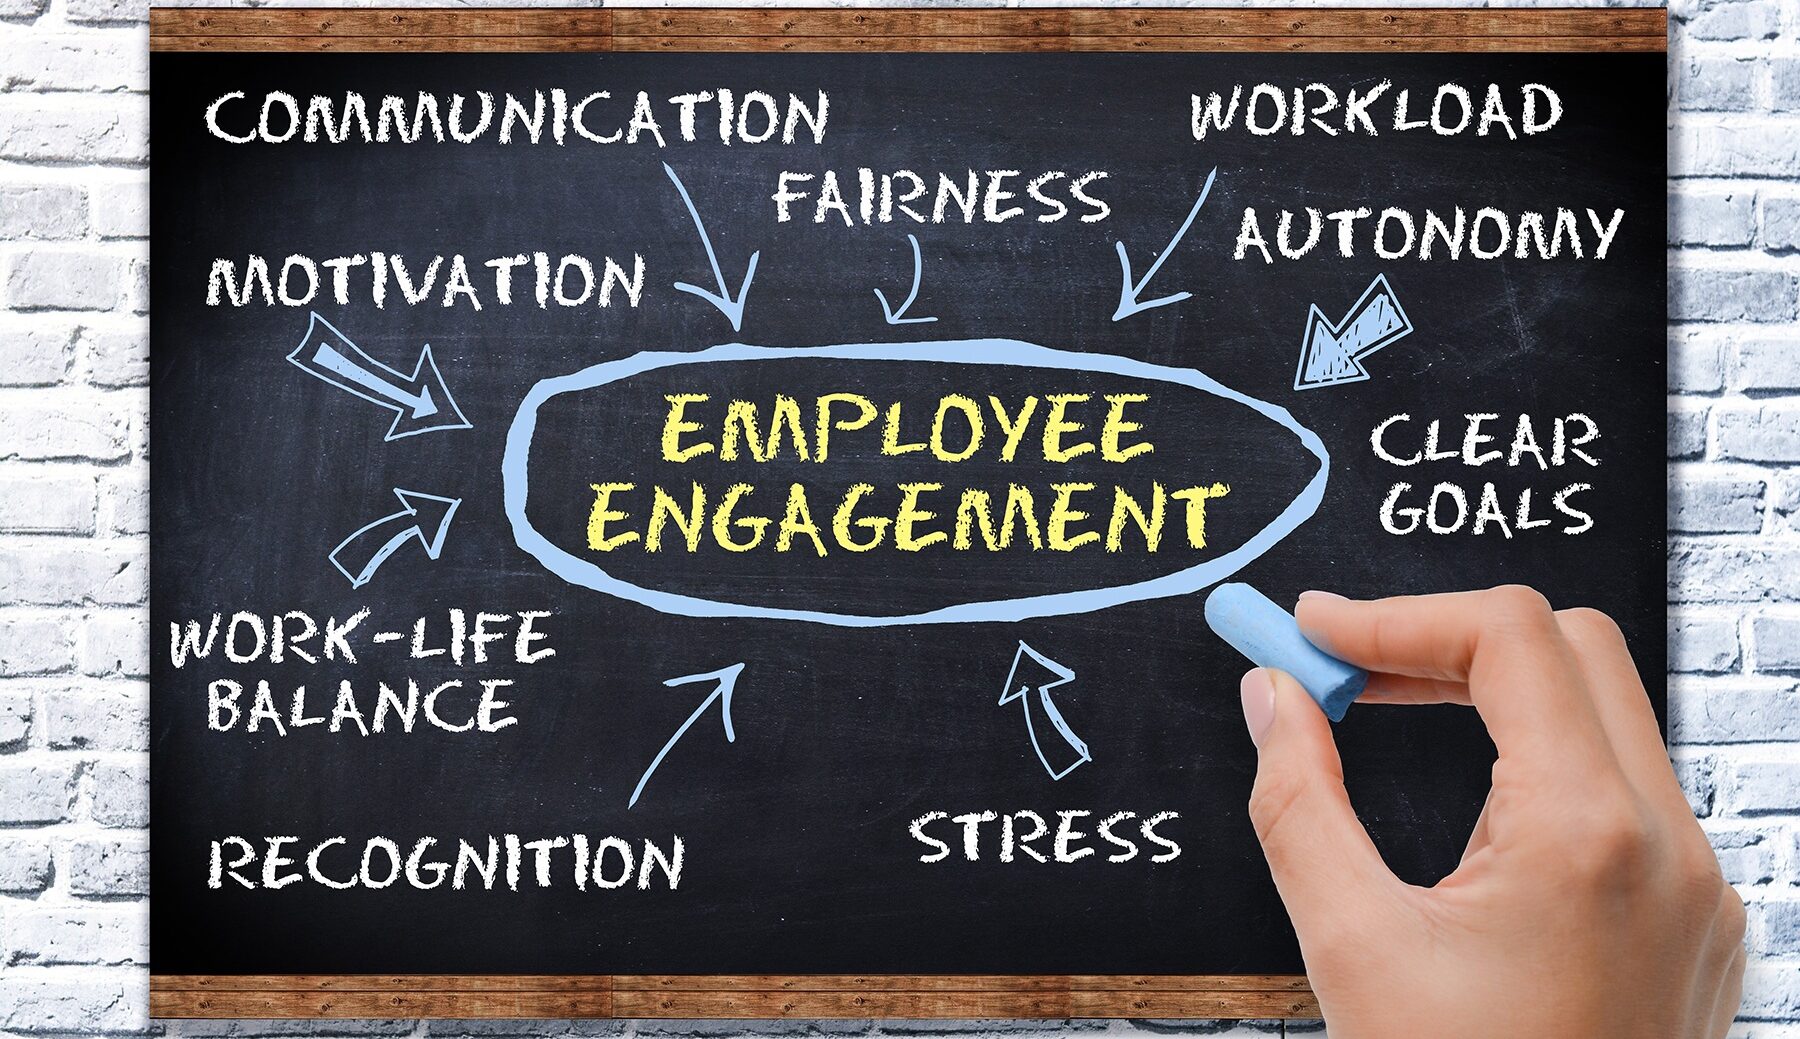 Employee engagement concept with text on blackboard